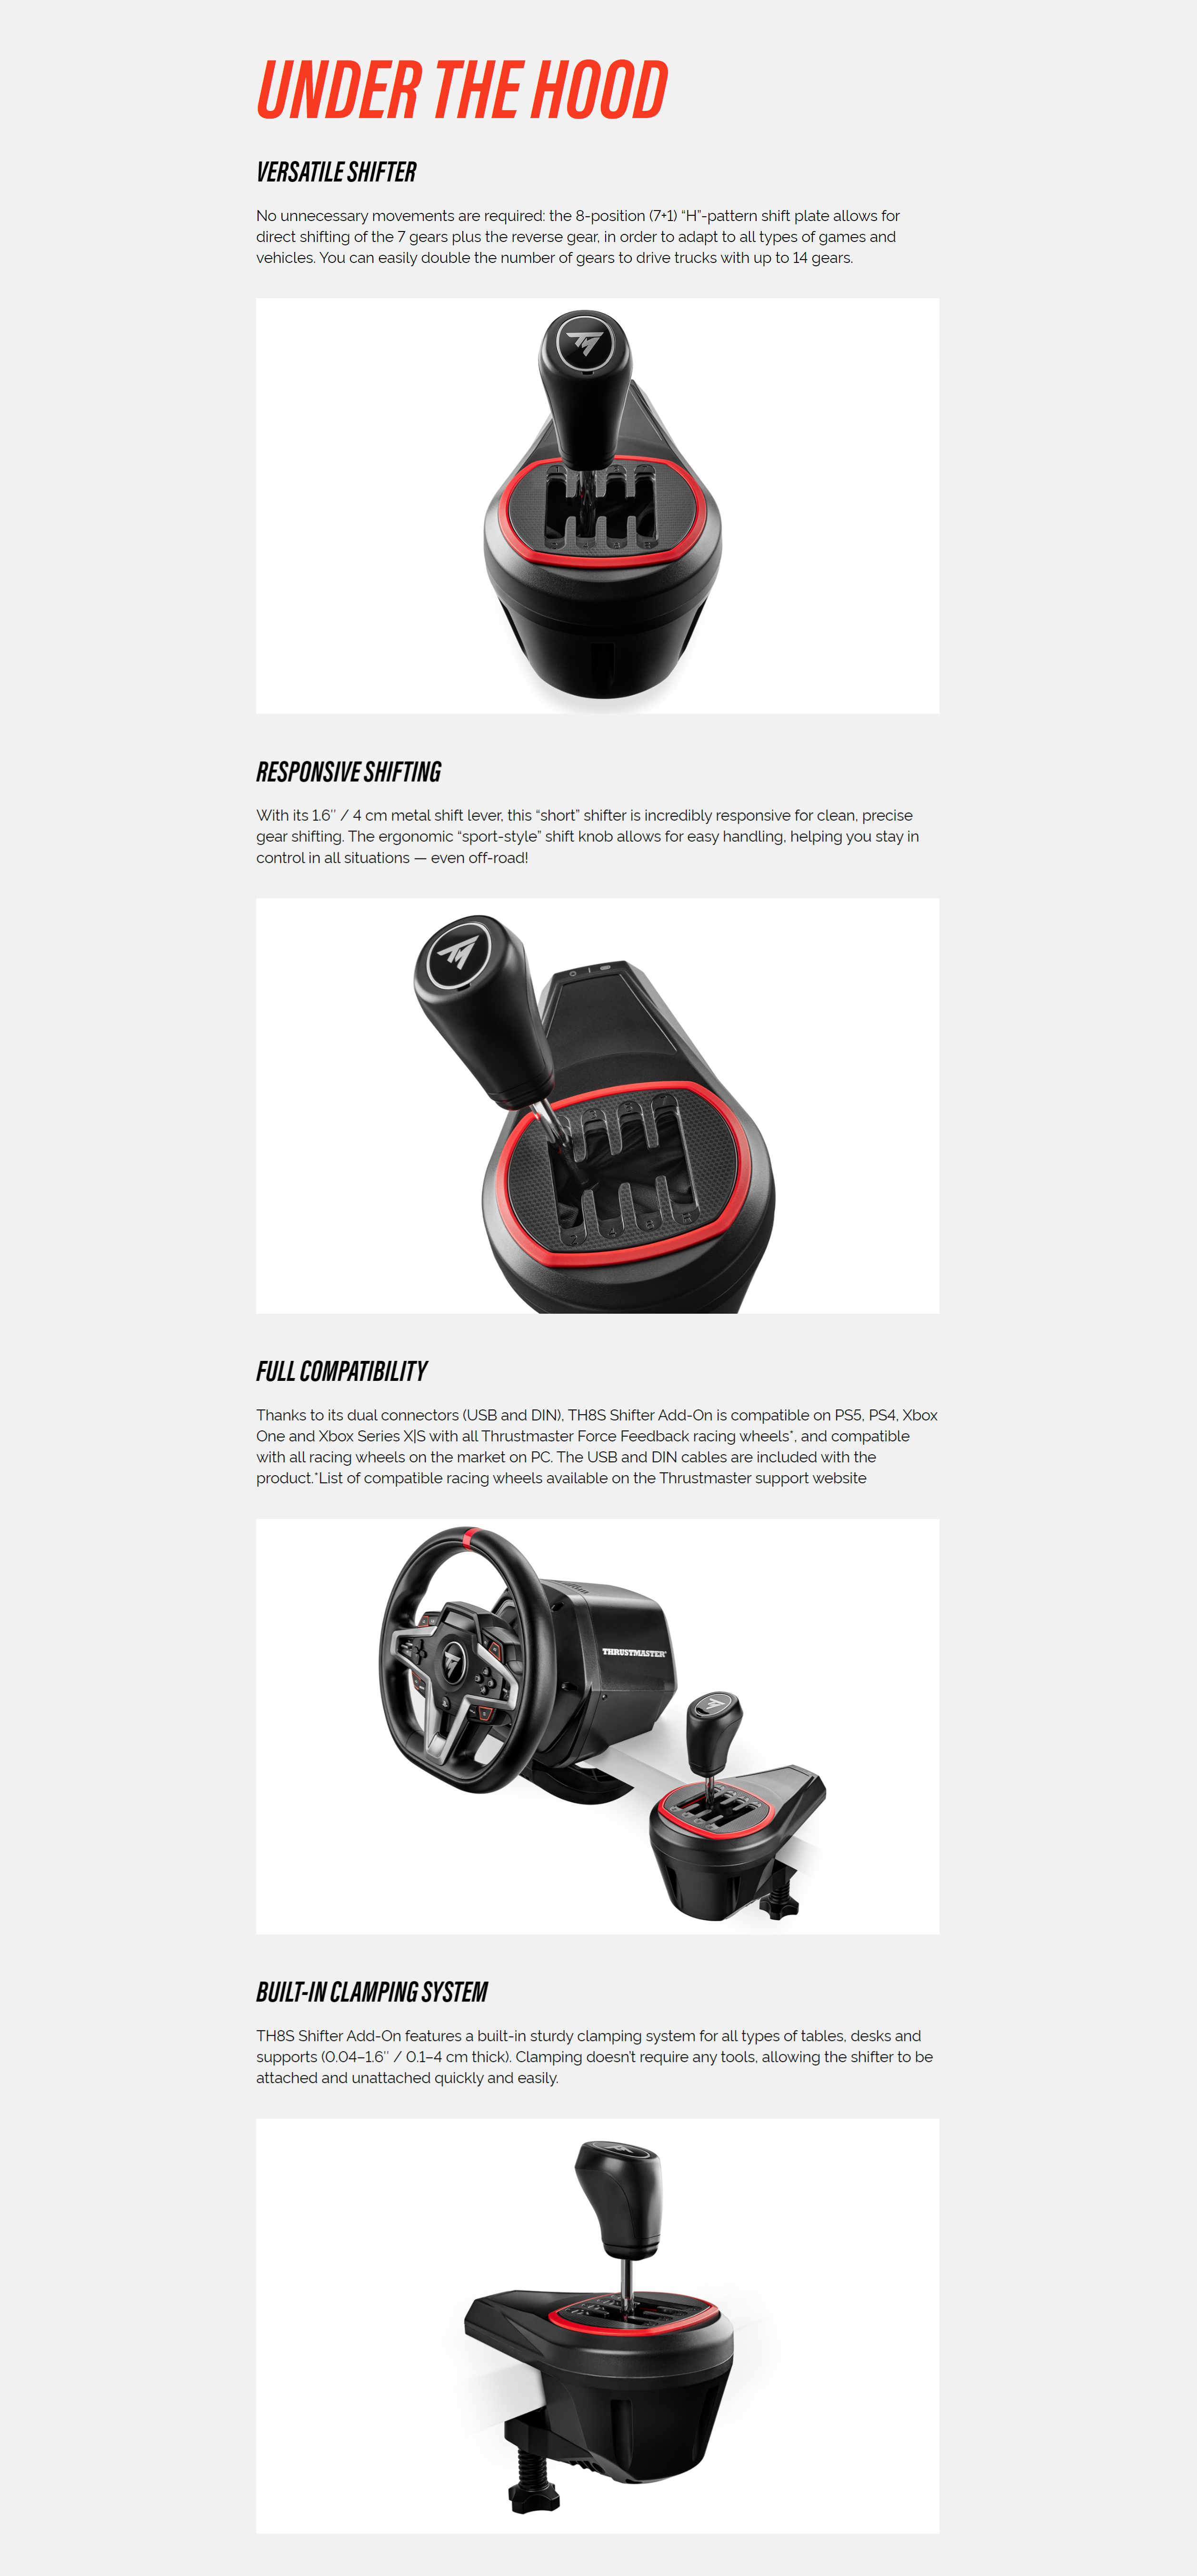 A large marketing image providing additional information about the product Thrustmaster TH8S - Shifter Add-On - Additional alt info not provided